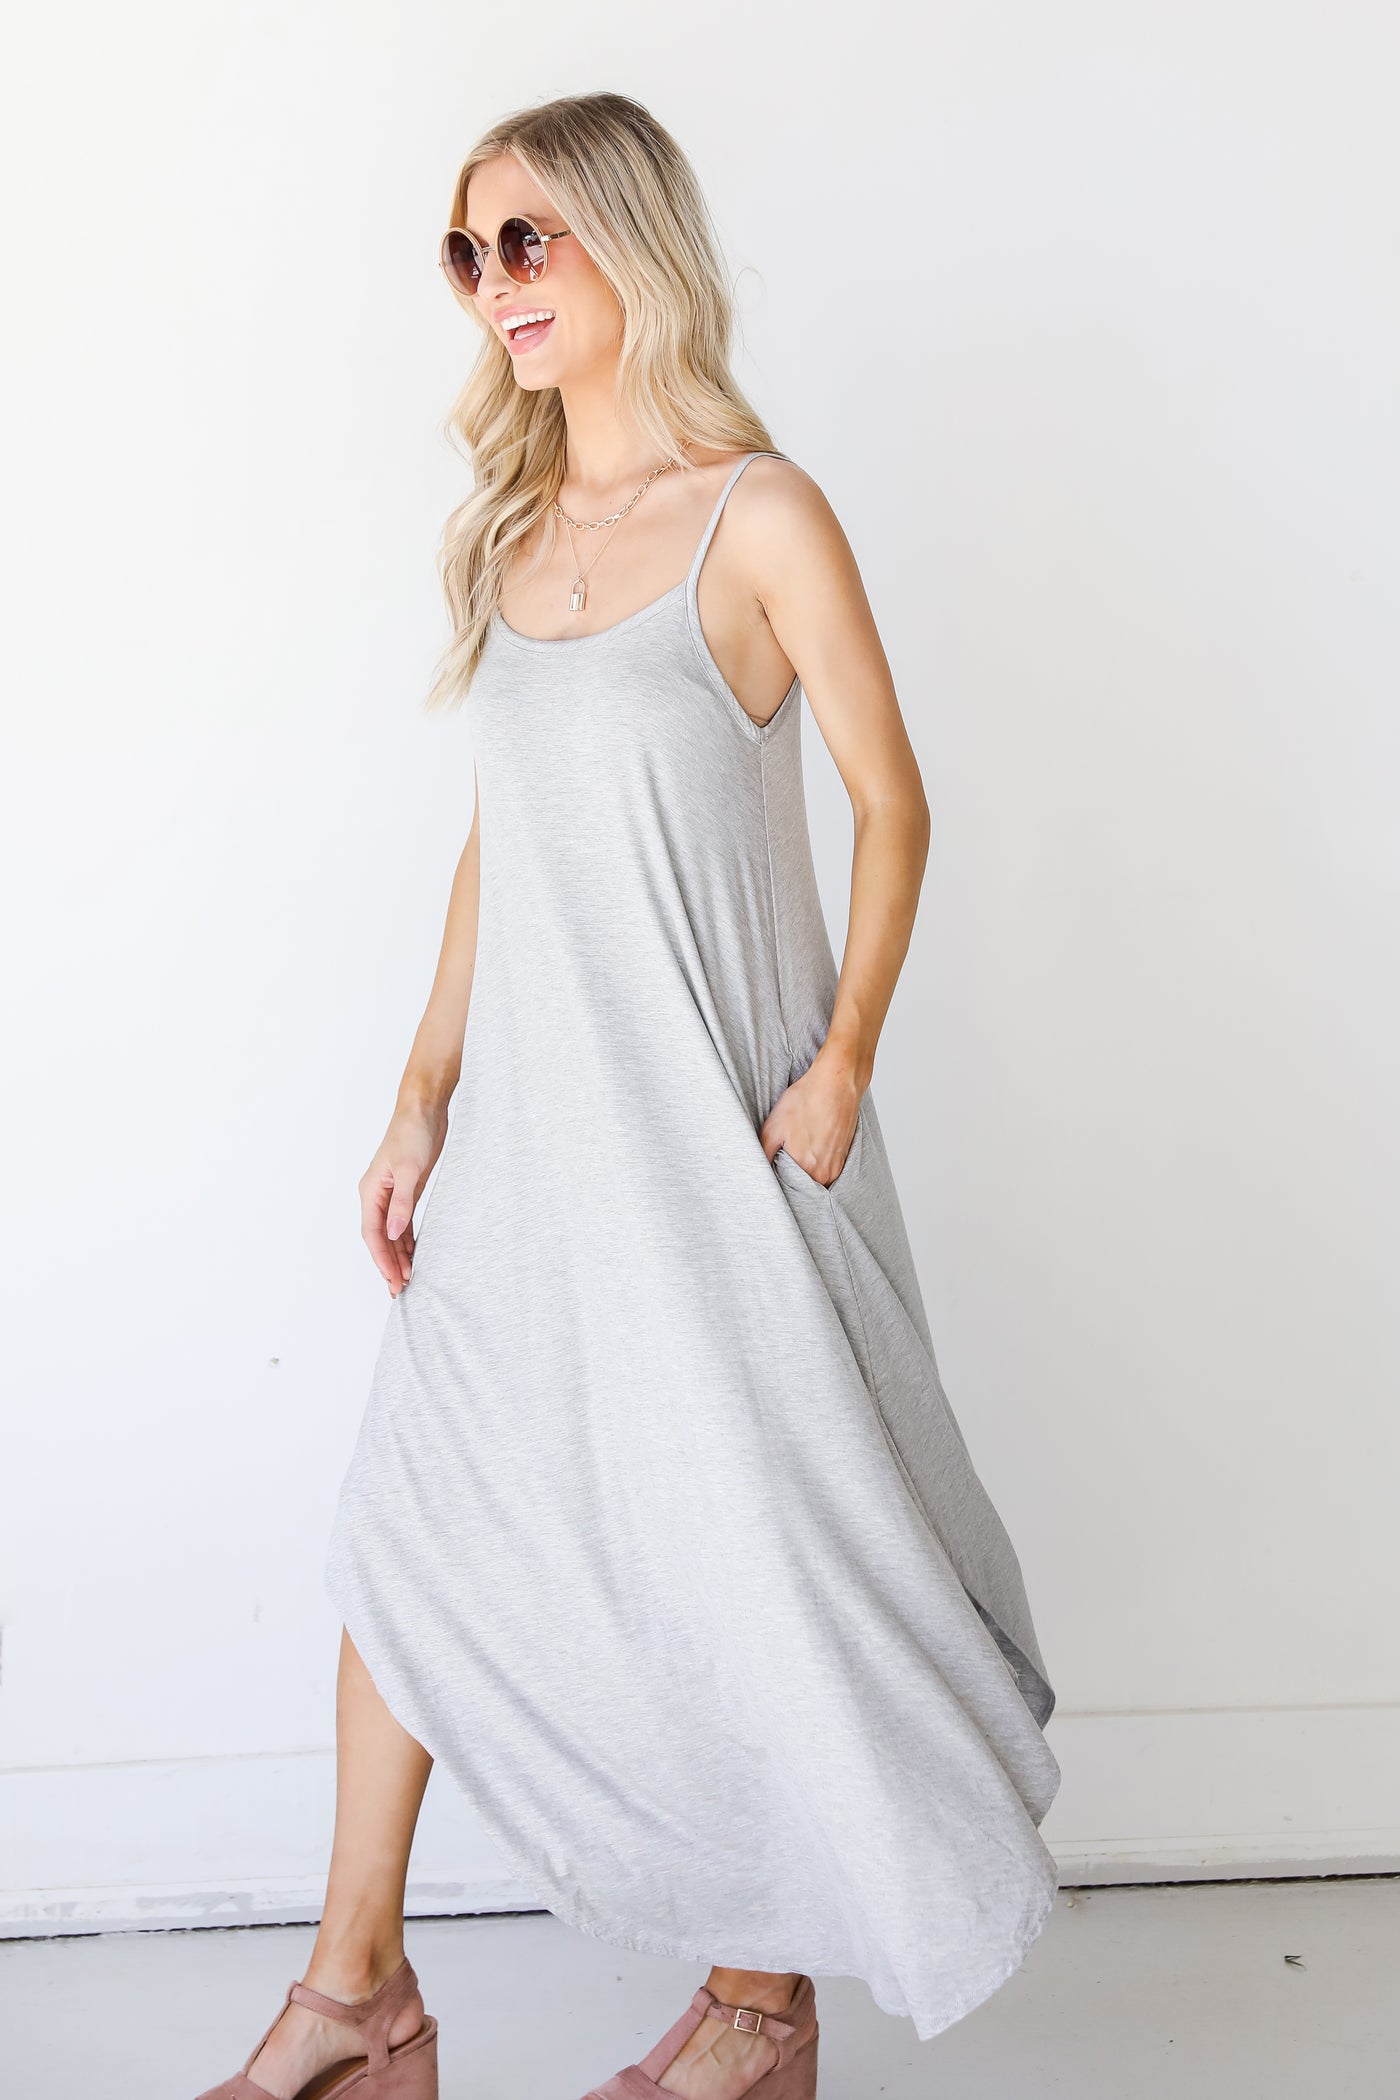 Jersey Knit Maxi Dress in heather grey side view